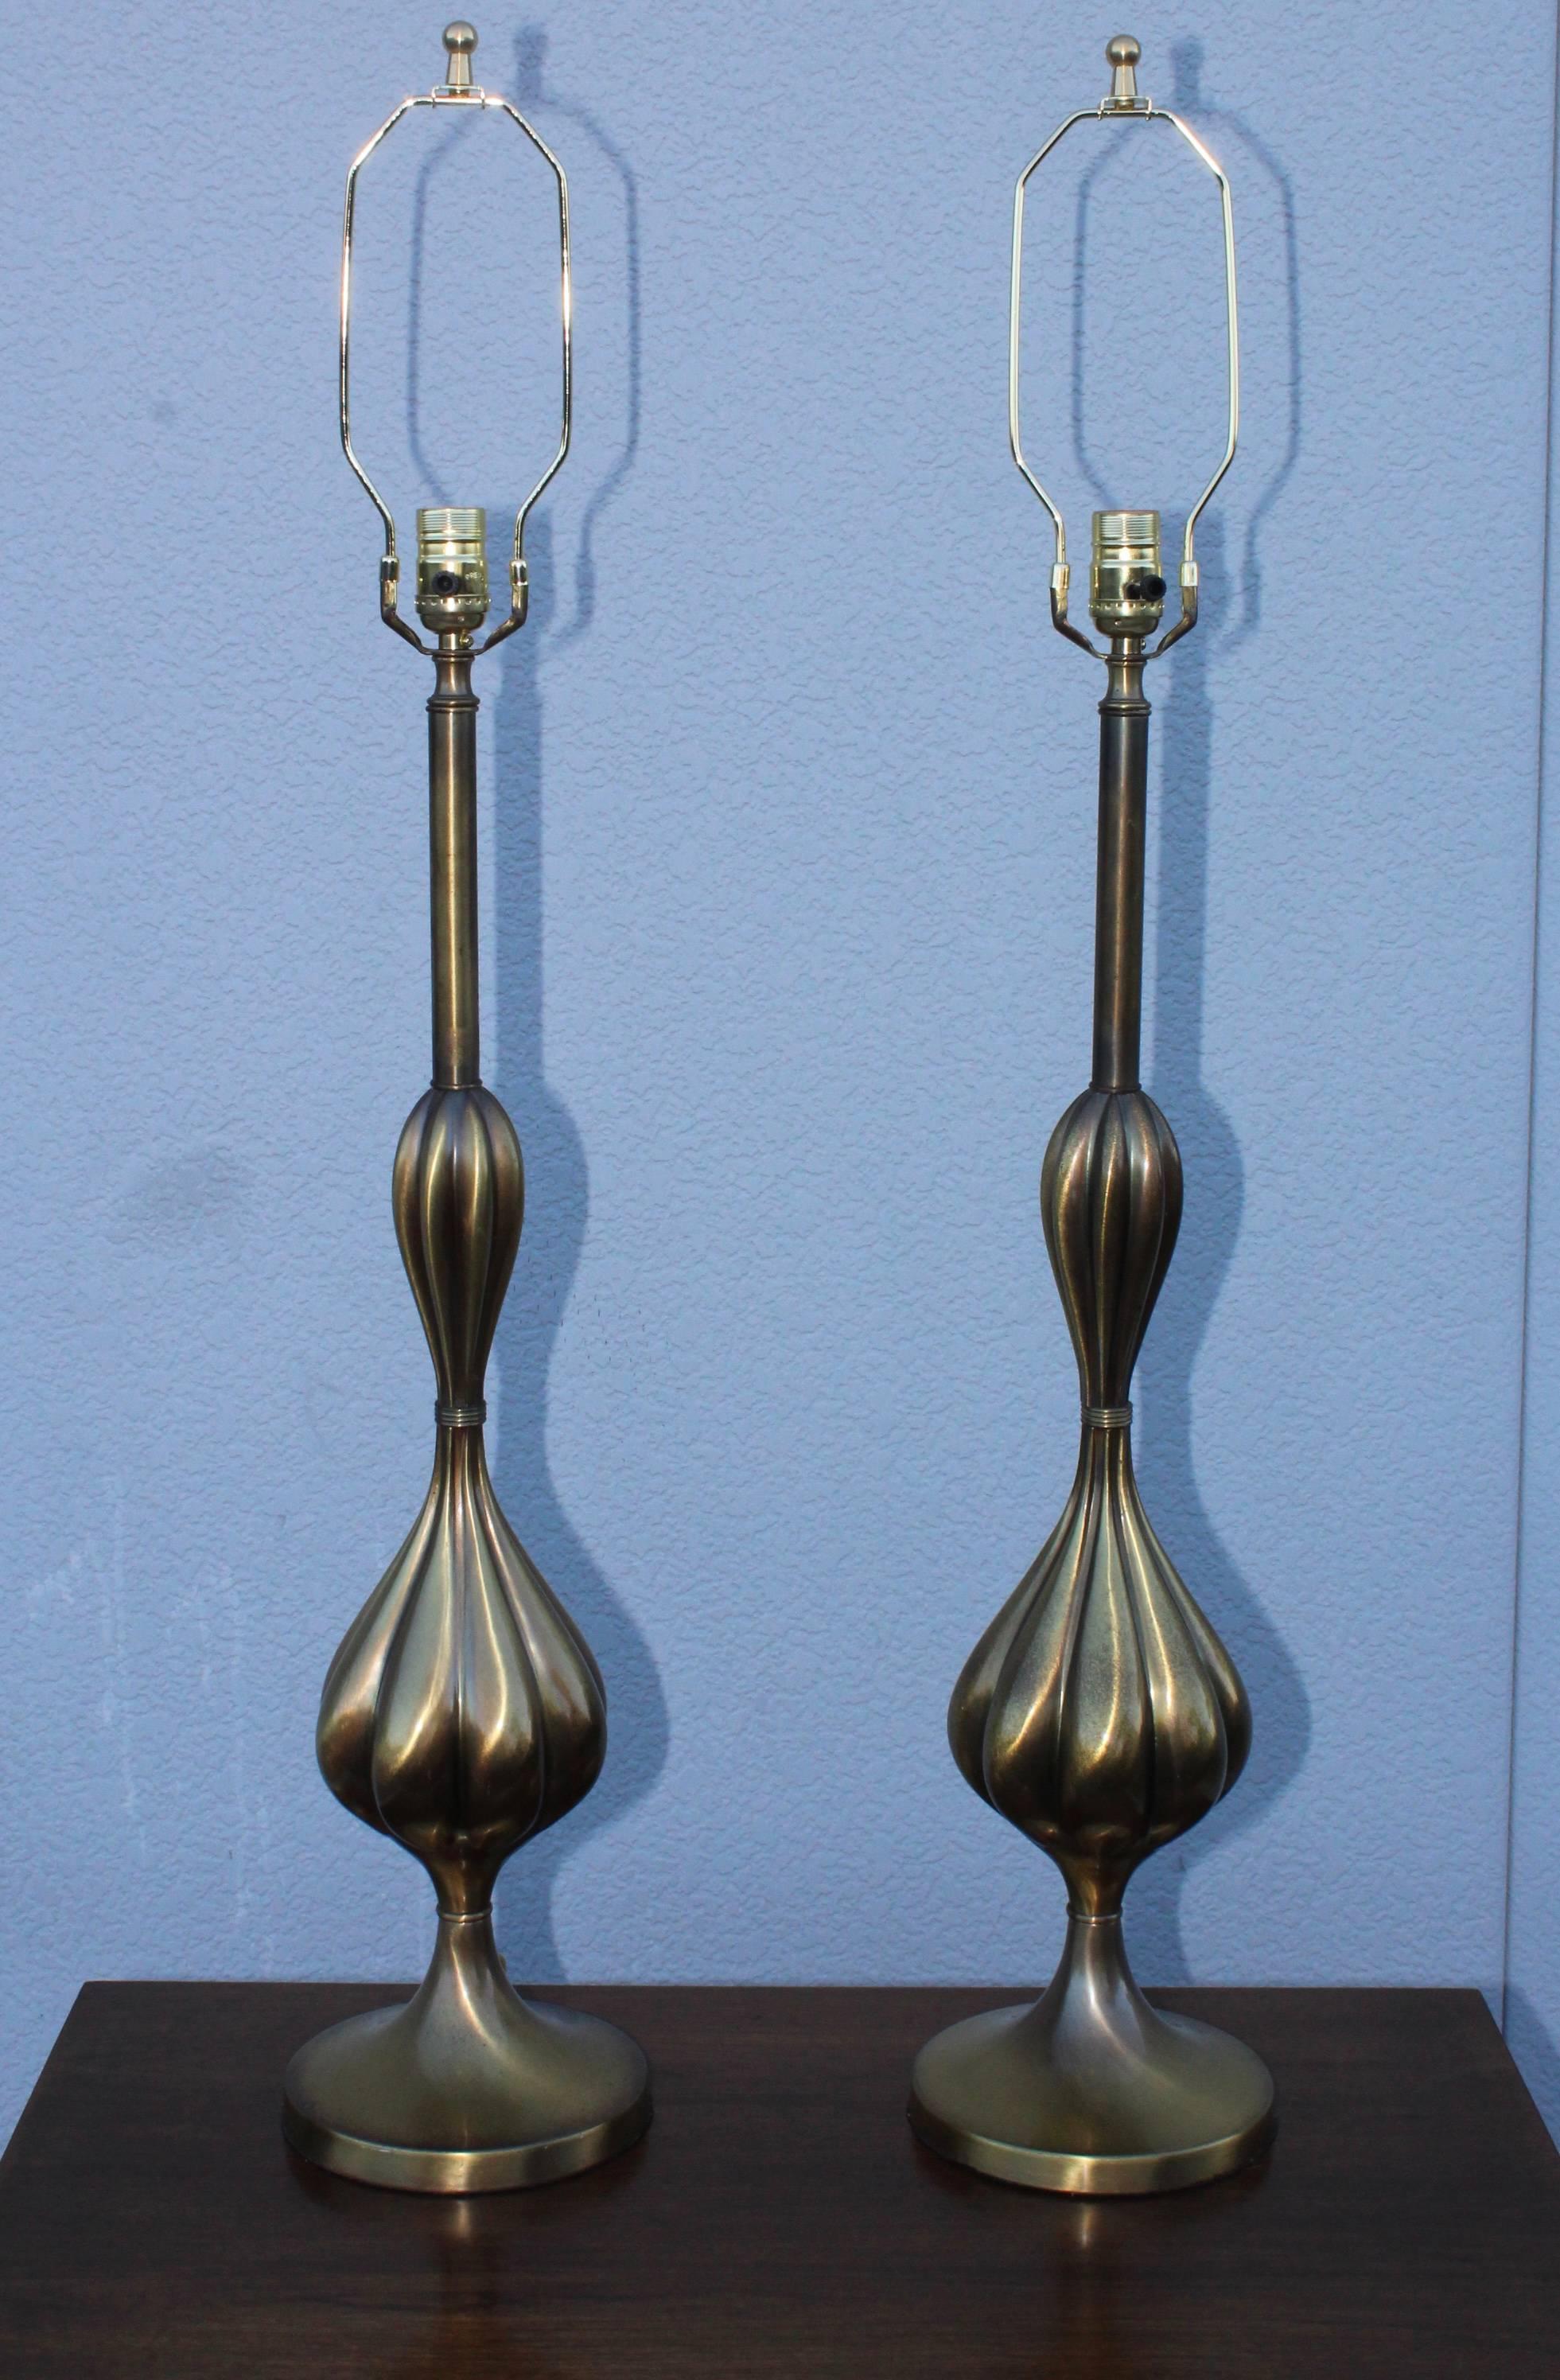 1950s patinated brass tall table lamps by Stiffel.

Height to light socket 31.5.